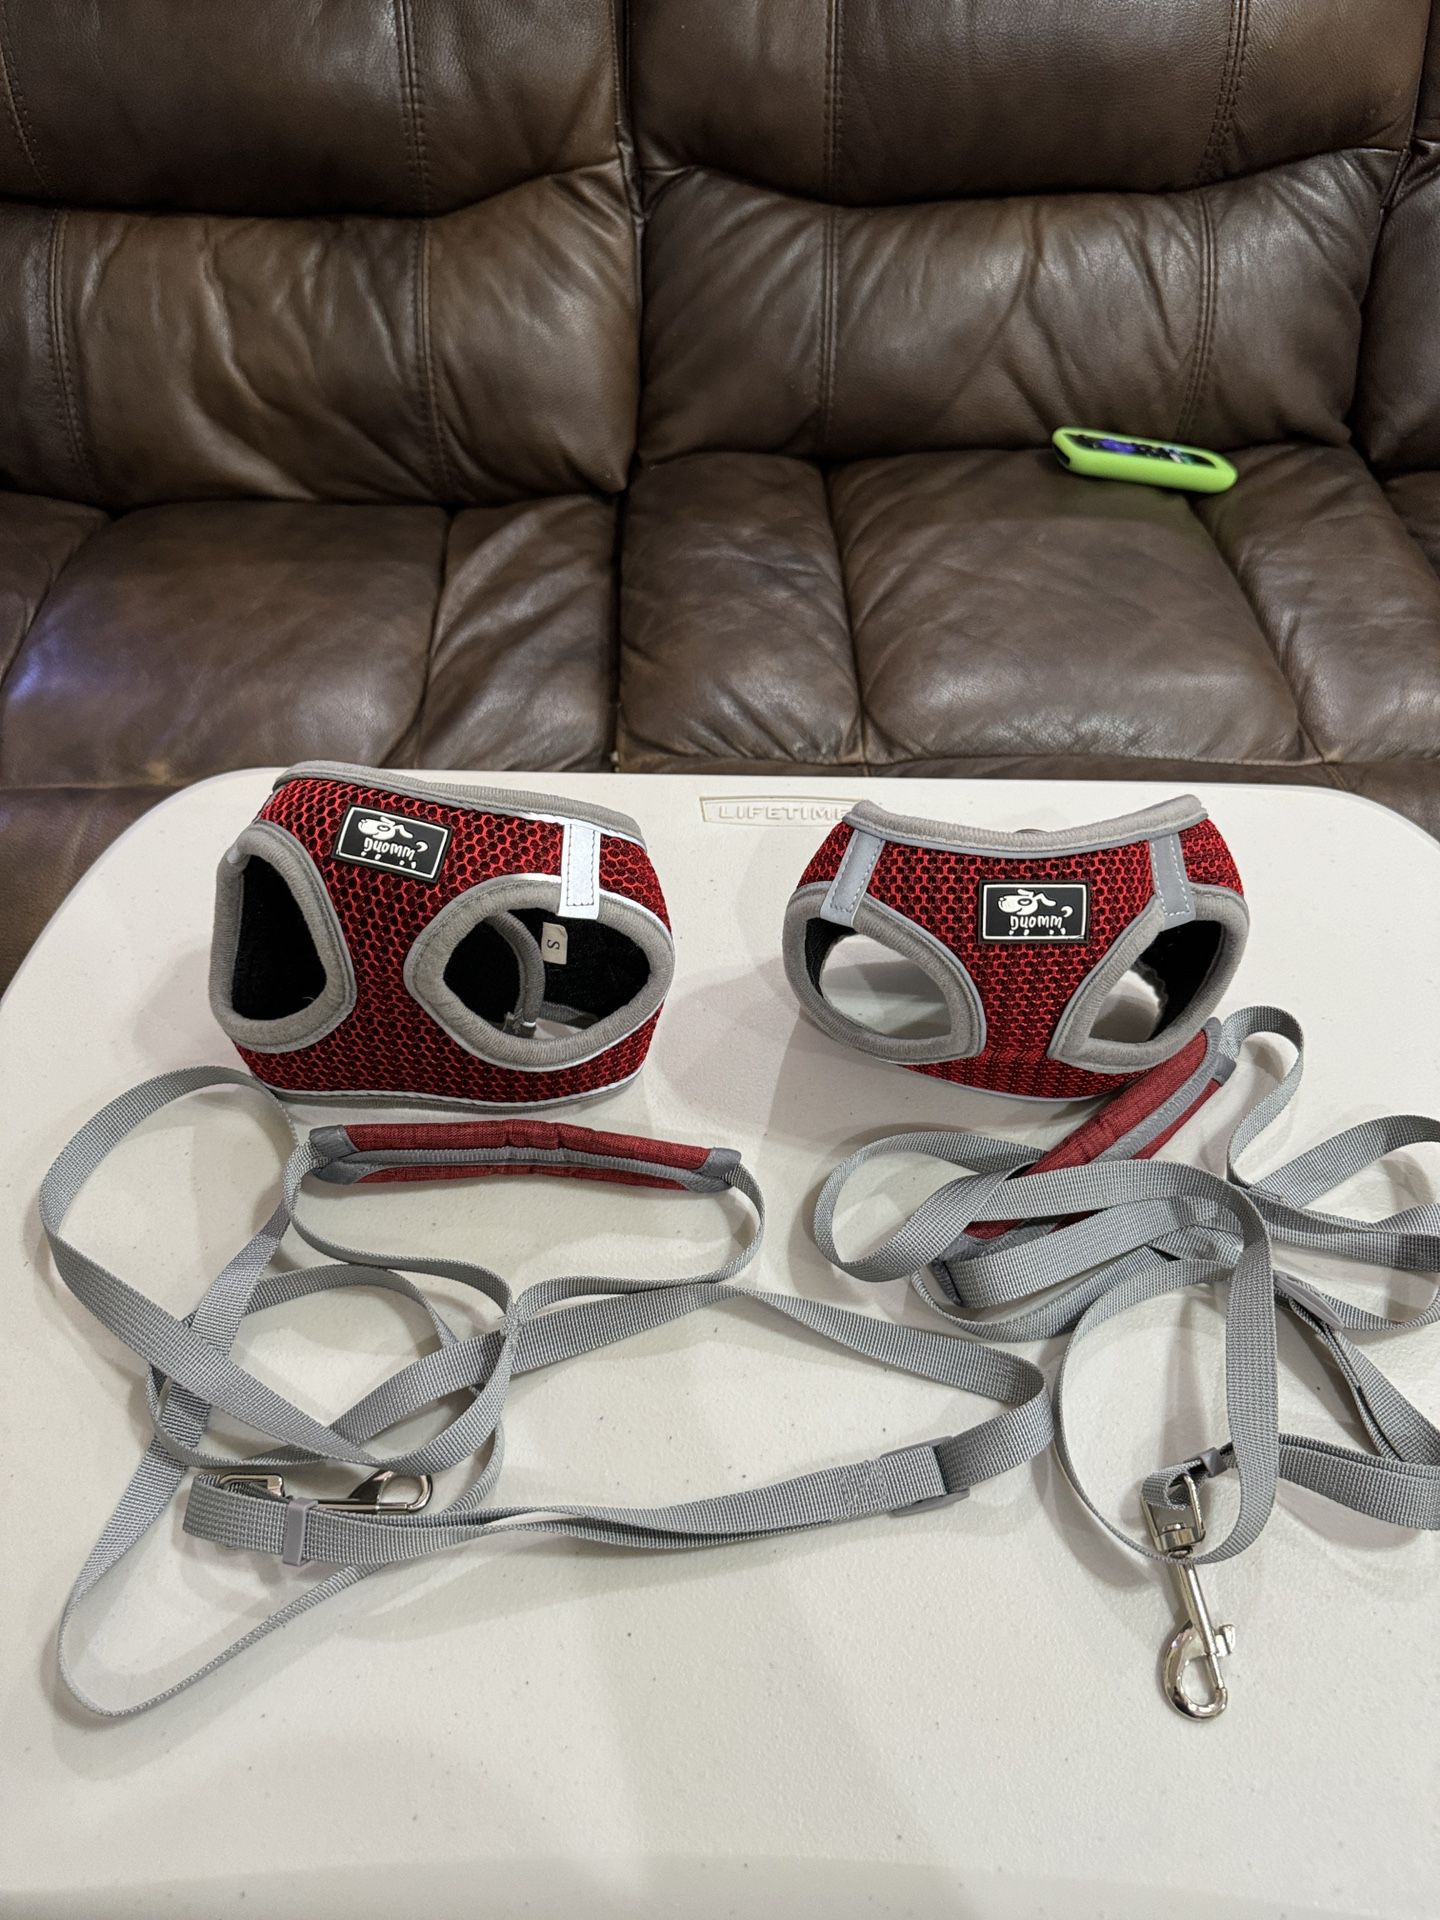 Small Dog /Puppy Harness With Leash (2 Sets Available)